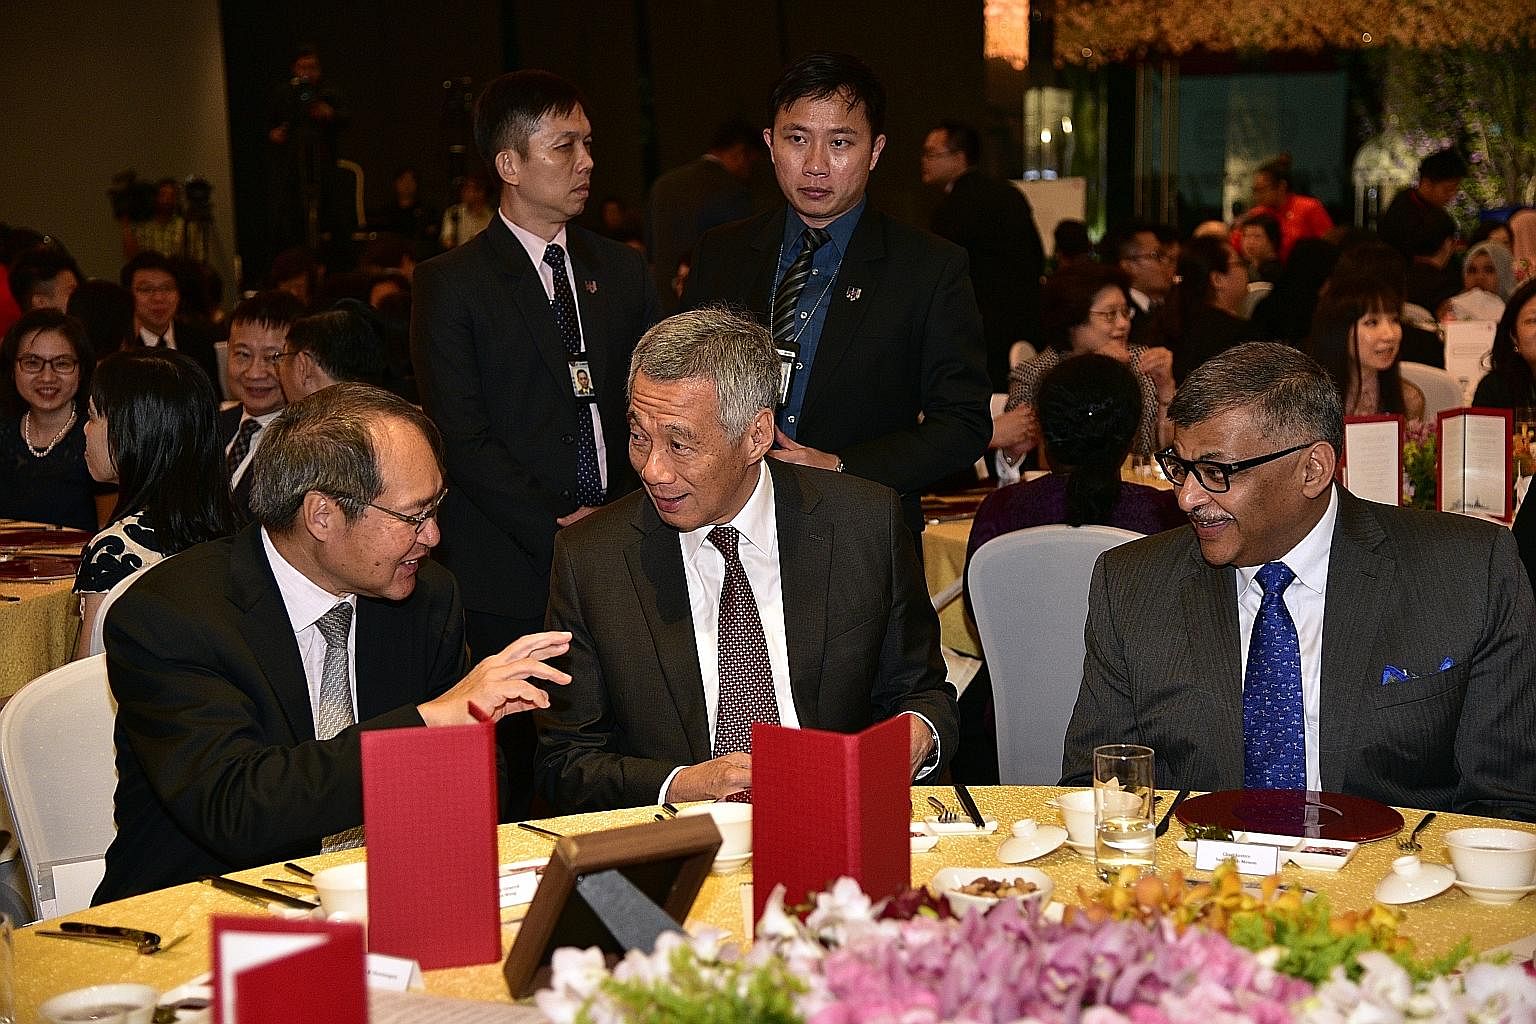 Prime Minister Lee Hsien Loong at the AGC's 150th anniversary celebrations last Friday with Attorney-General Lucien Wong and Chief Justice Sundaresh Menon.